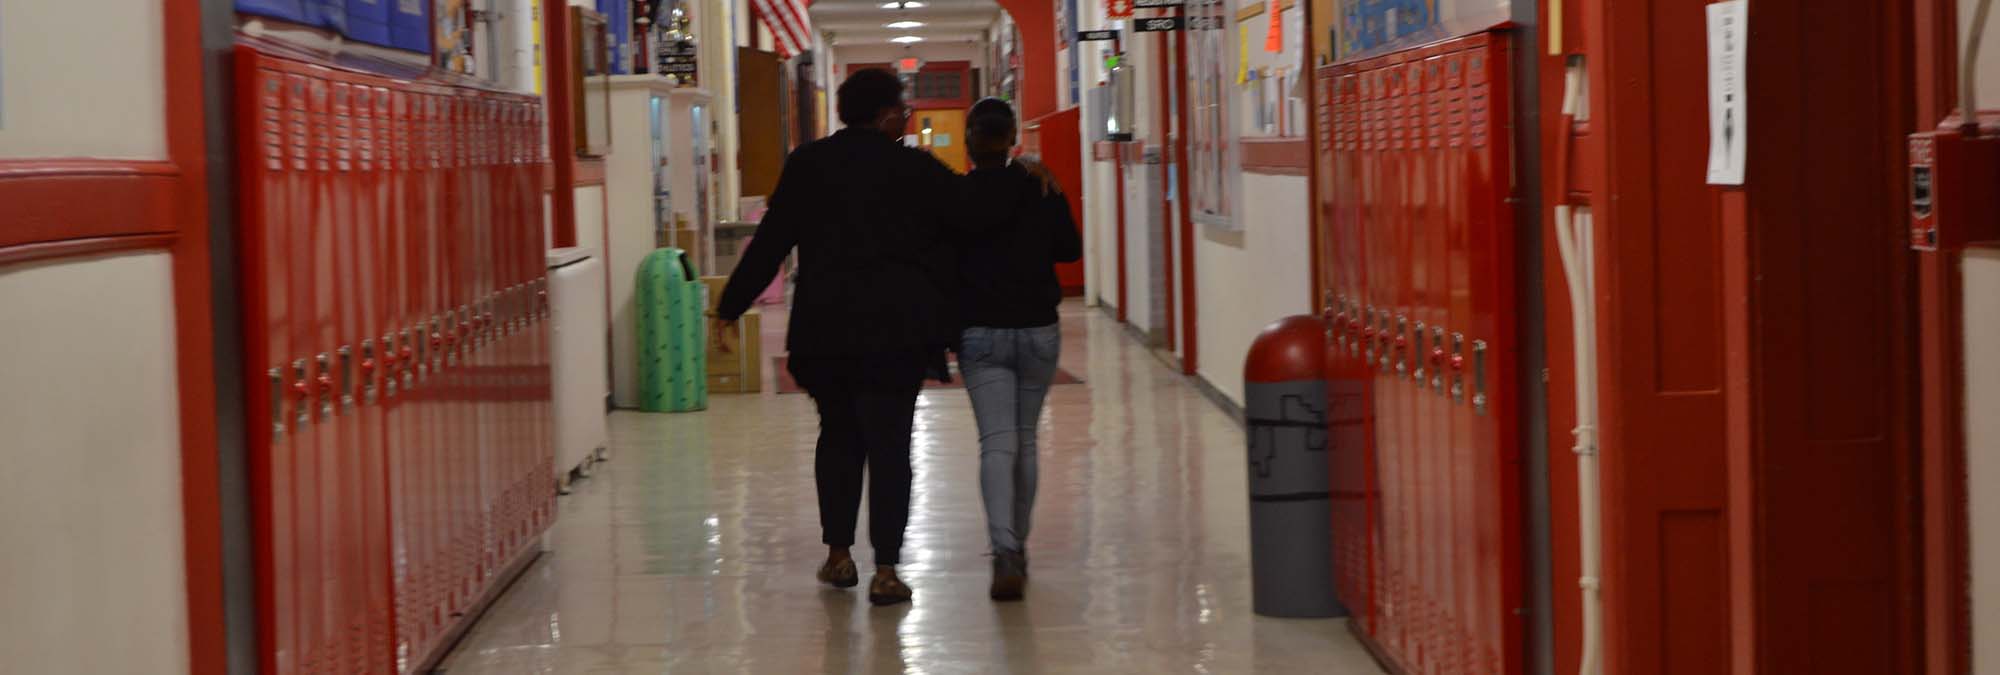 Teacher and student walking together and bonding